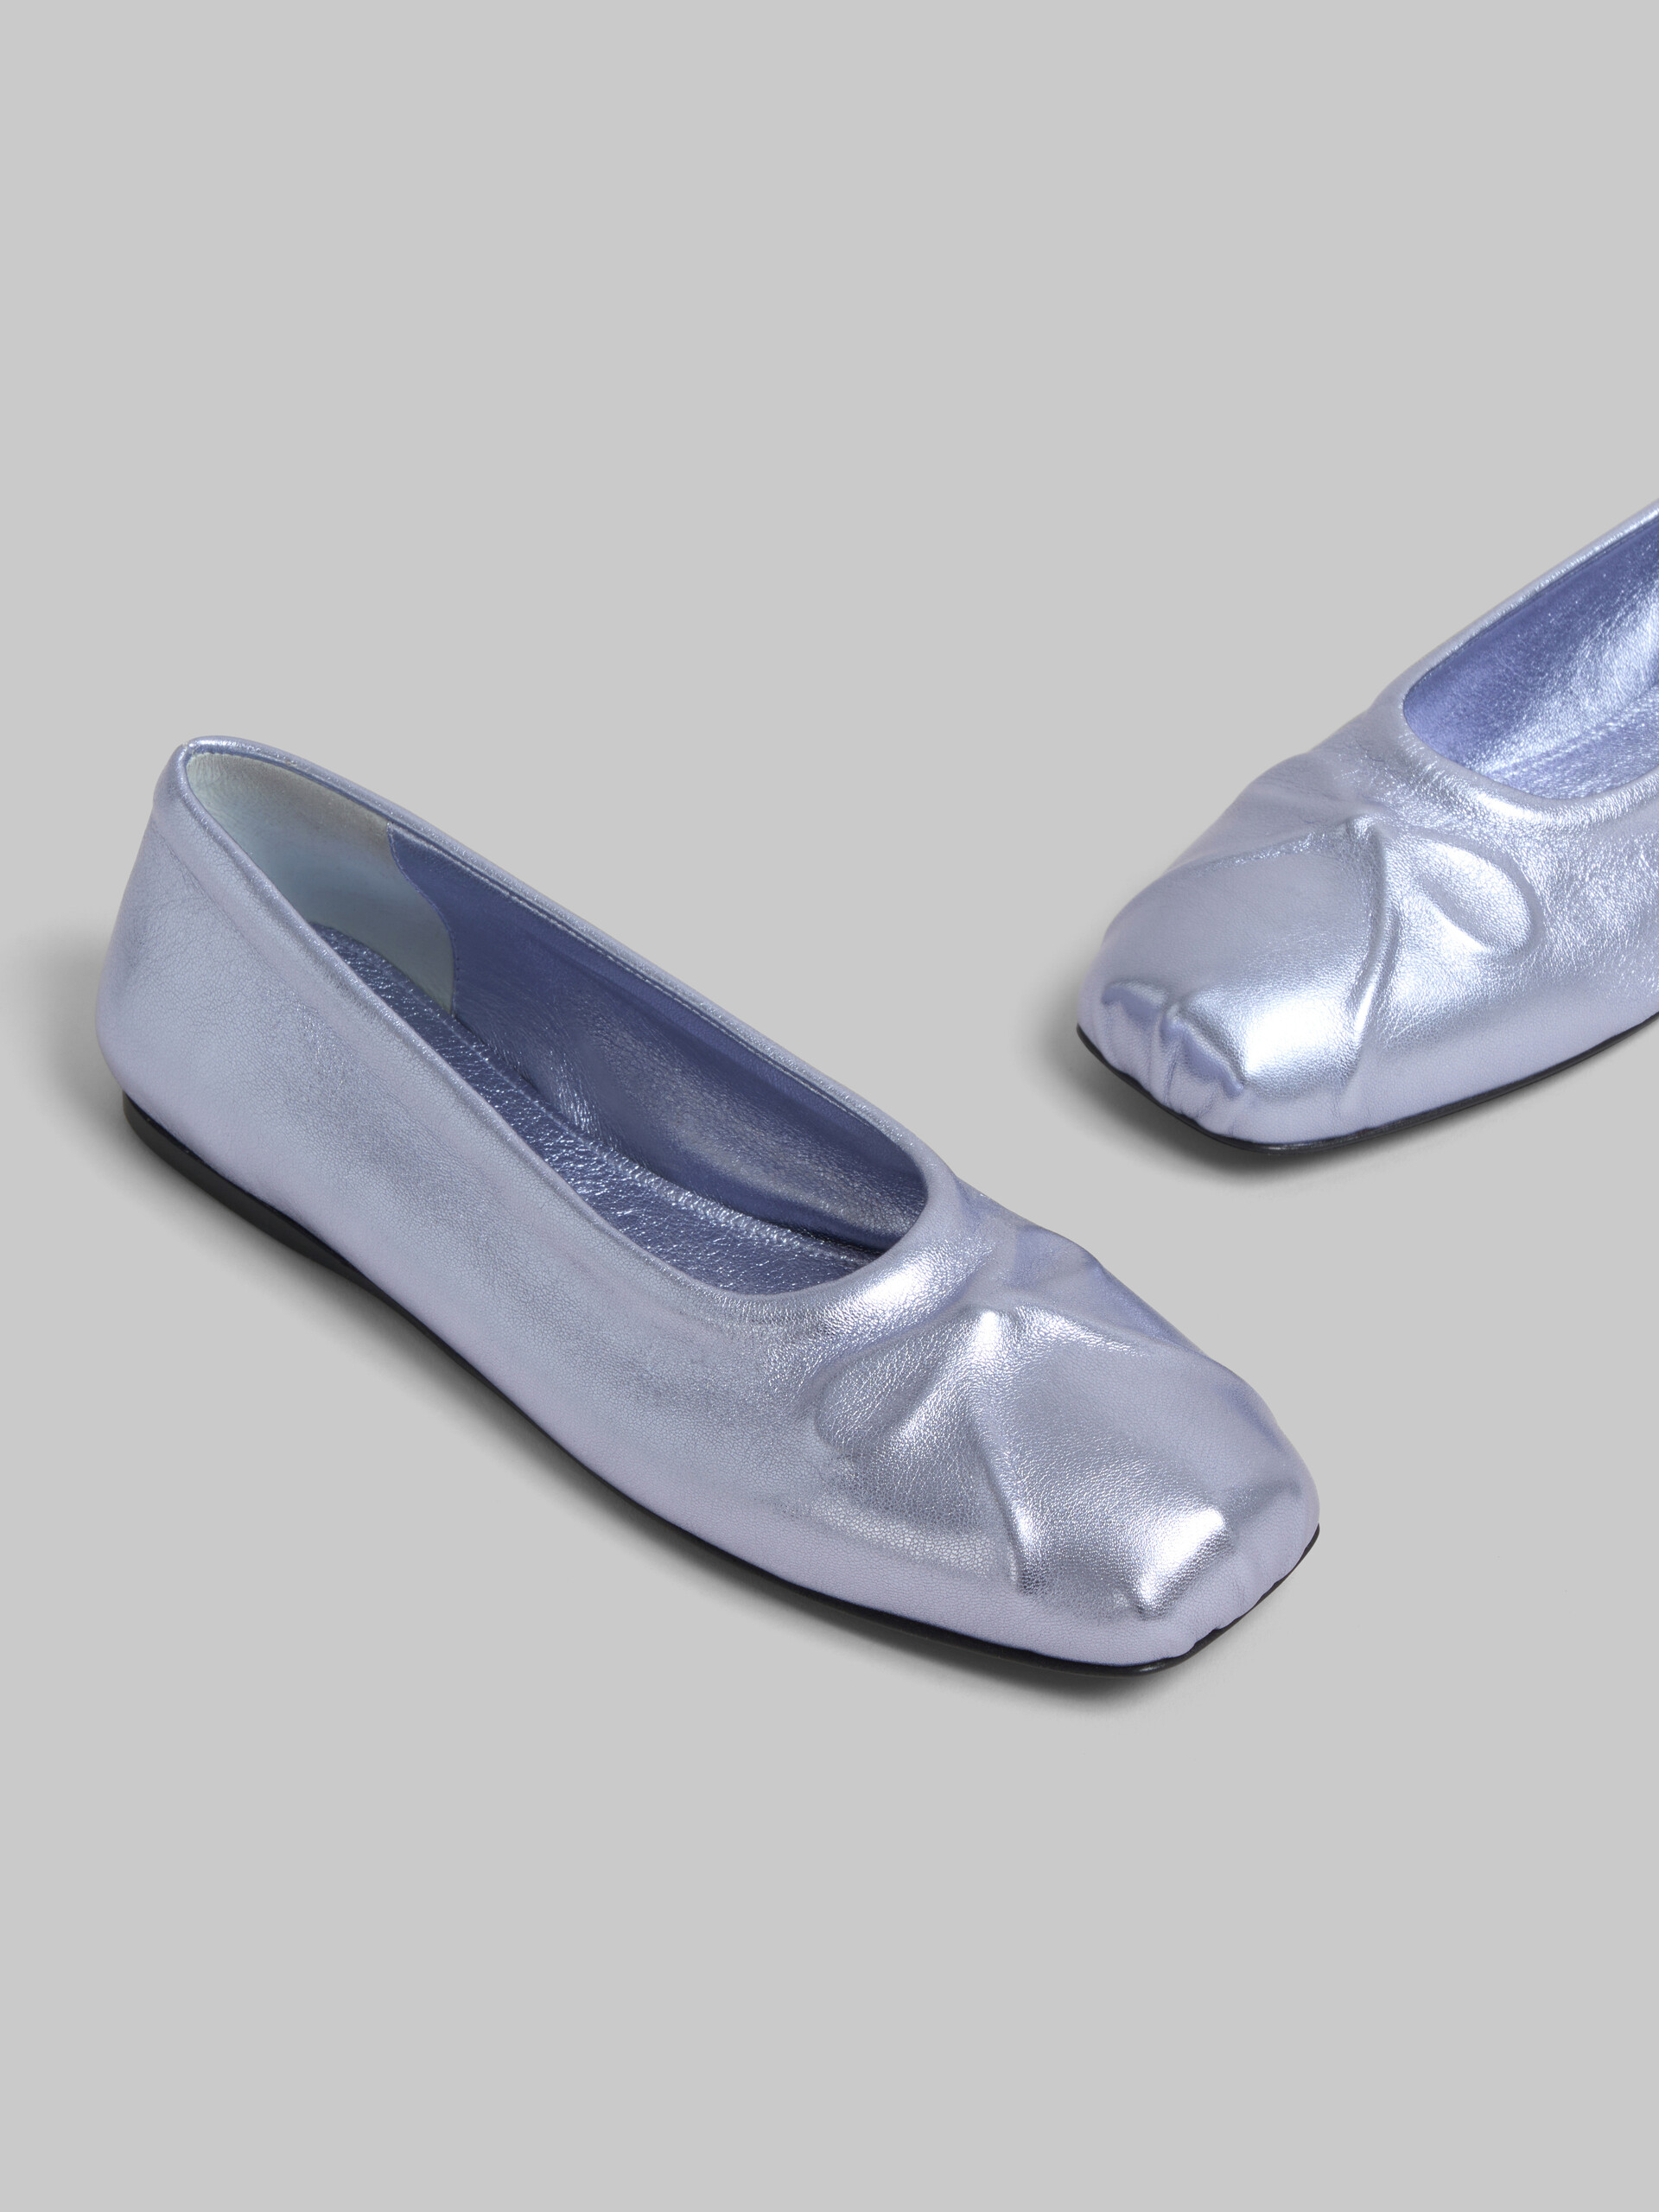 Light blue nappa leather seamless Little Bow ballet flat - Ballet Shoes - Image 5